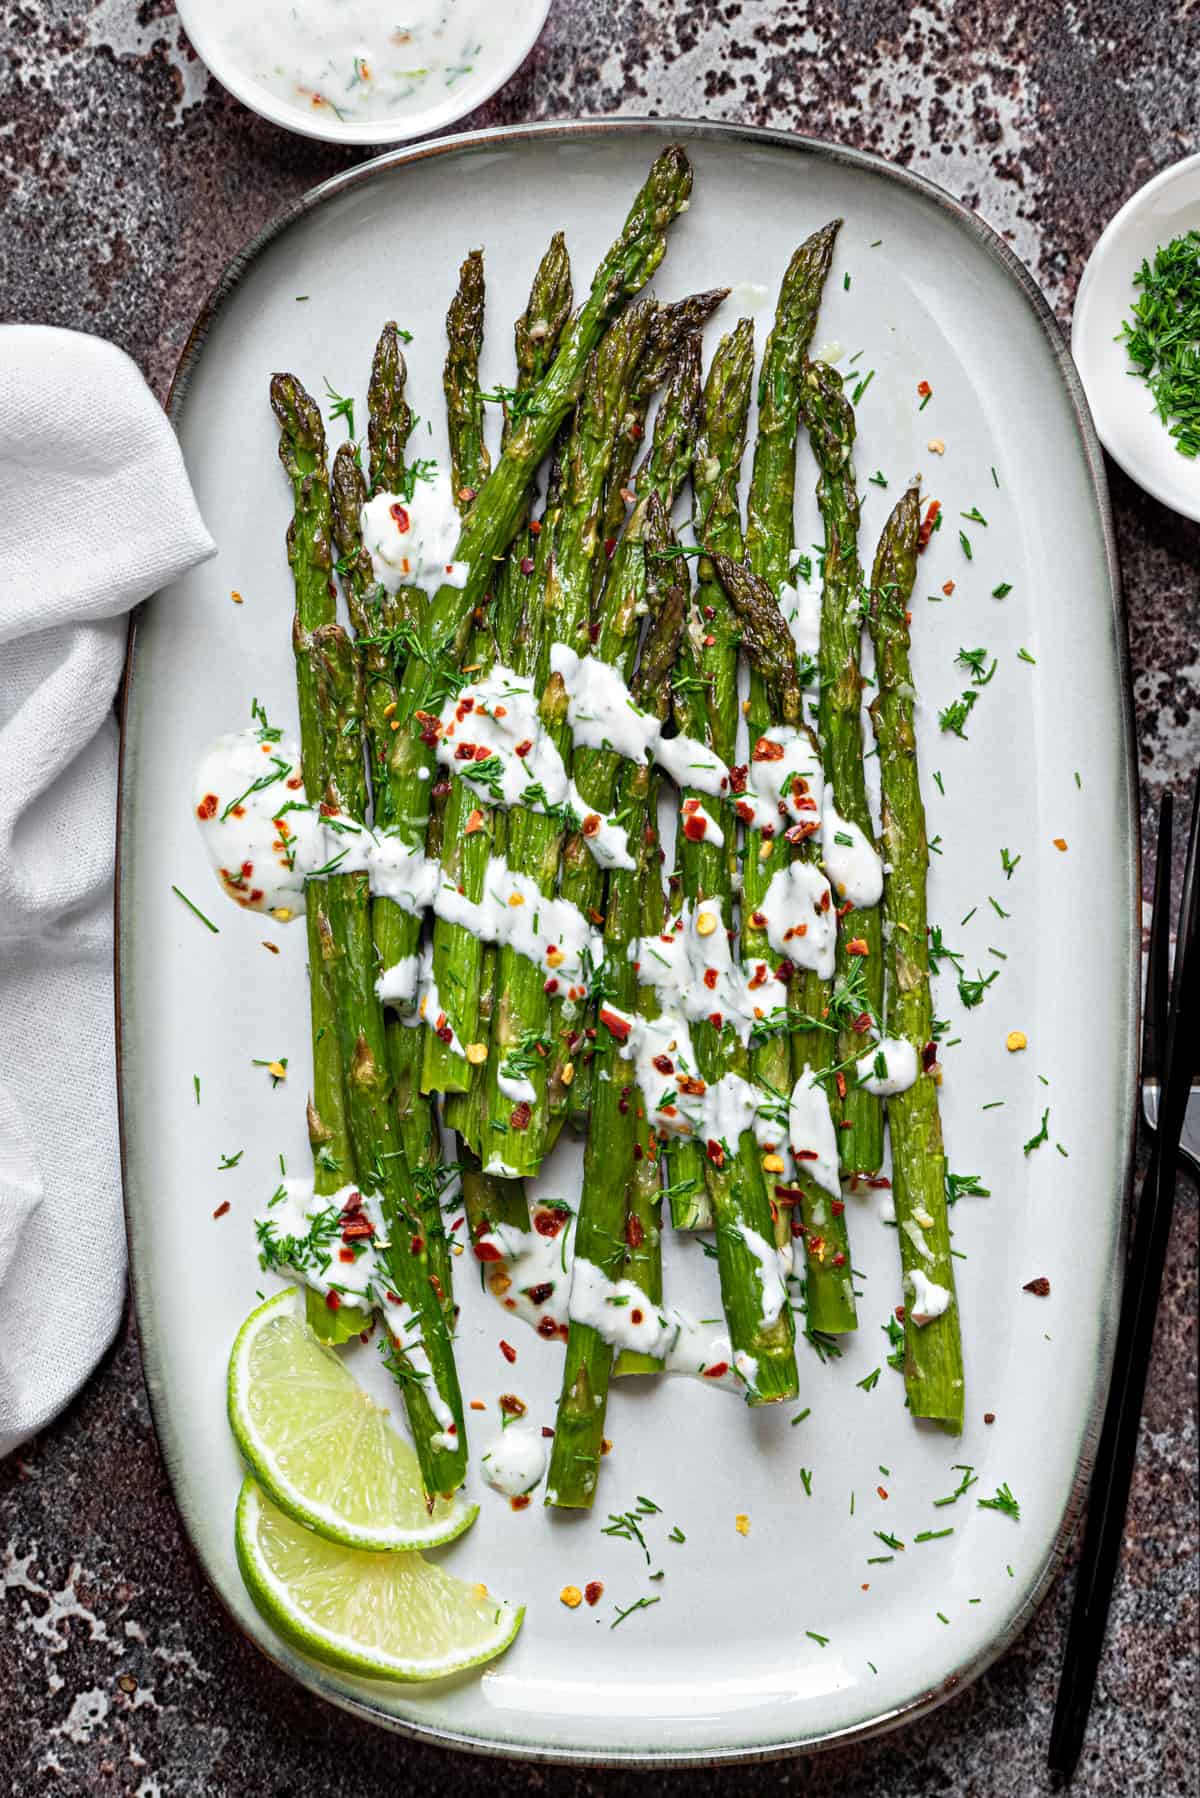 Oven roasted asparagus on a ceramic serving dish, topped with a drizzle of dill sour cream sauce.